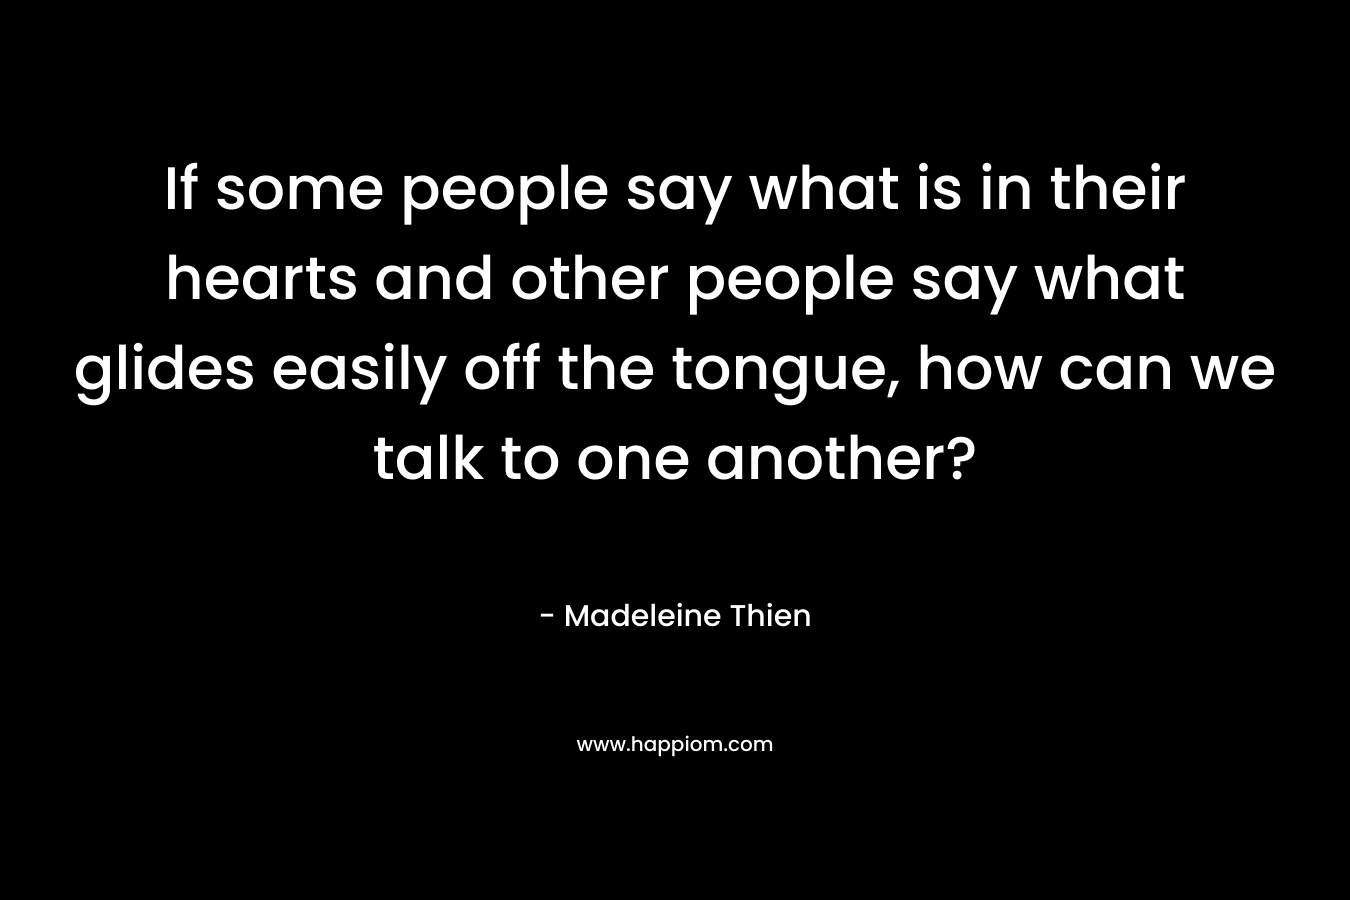 If some people say what is in their hearts and other people say what glides easily off the tongue, how can we talk to one another?